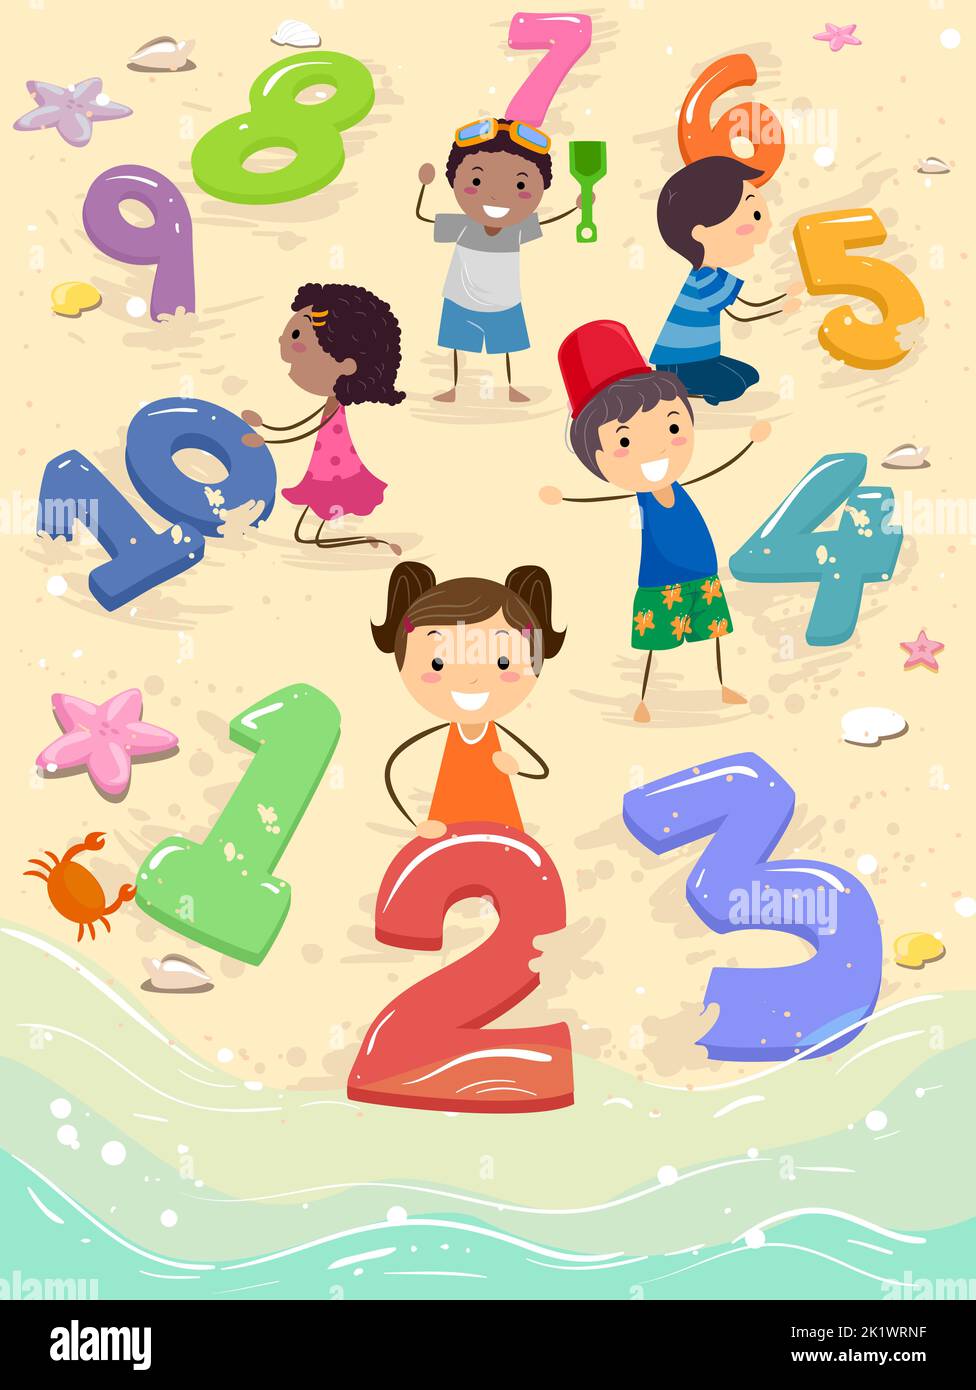 Illustration of Stickman Kids Playing with Numbers by the Beach Stock Photo